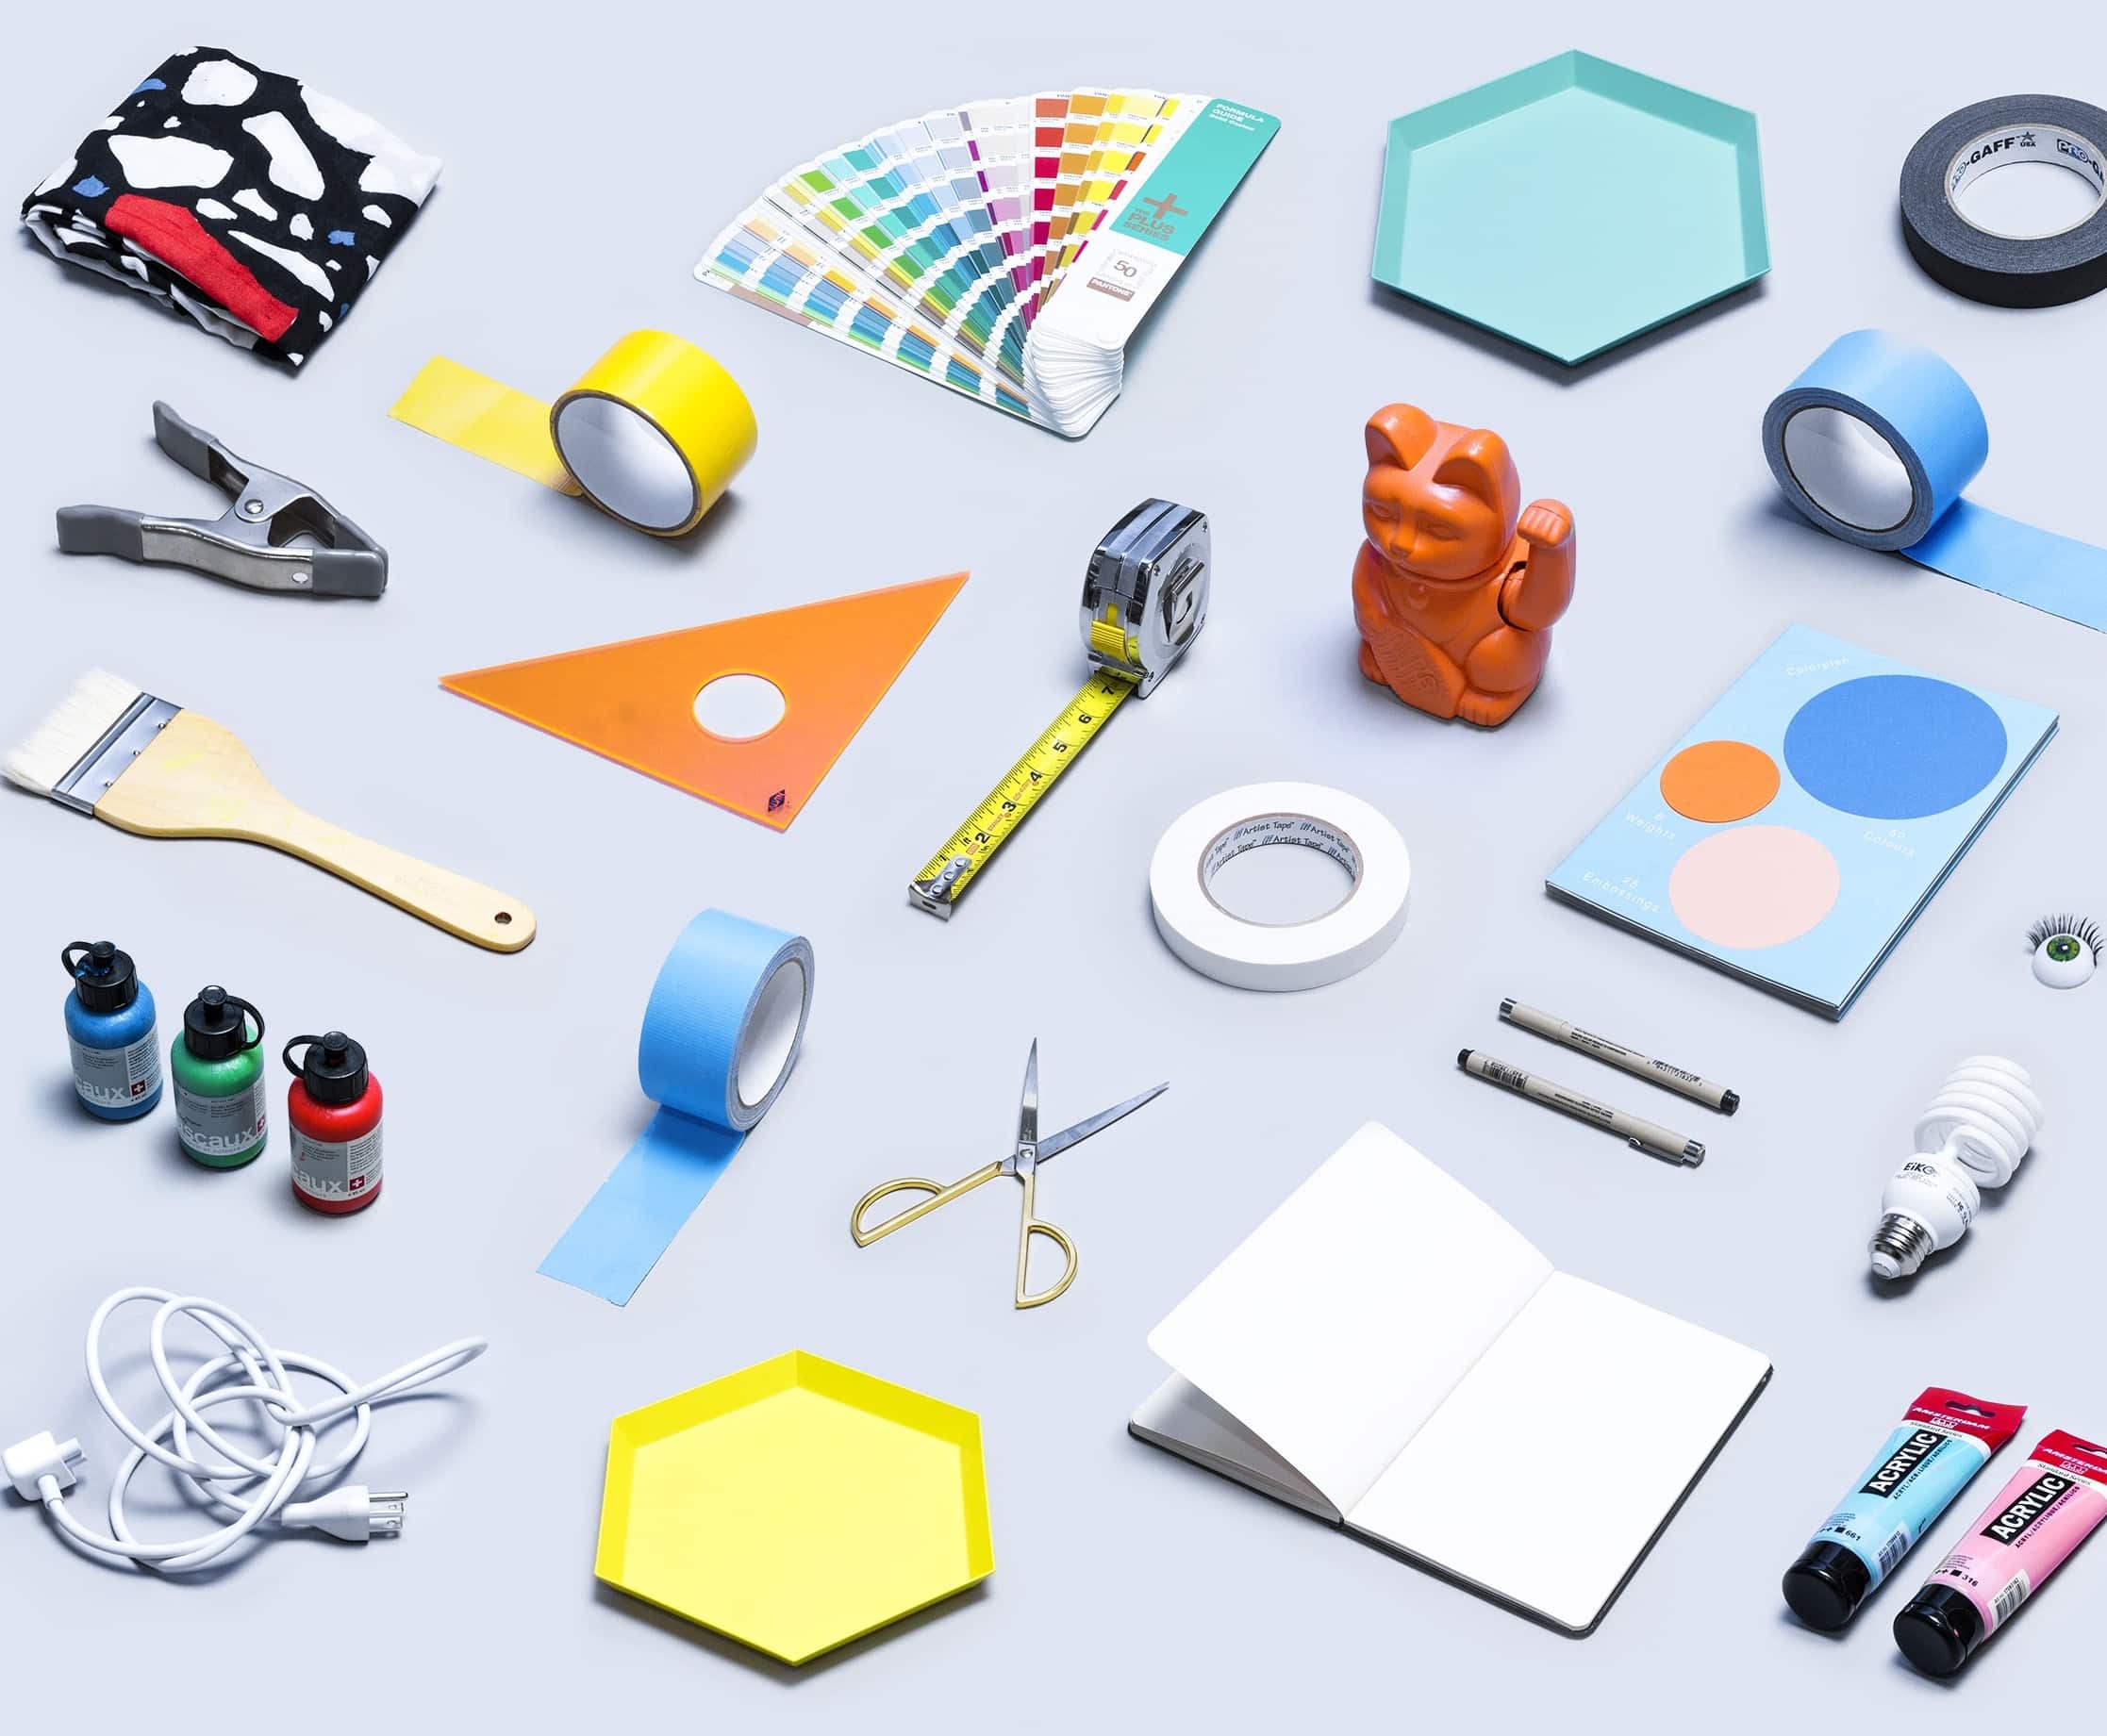 Leta Sobierajski: The playful art director shares her ‘Complements’ toolkit